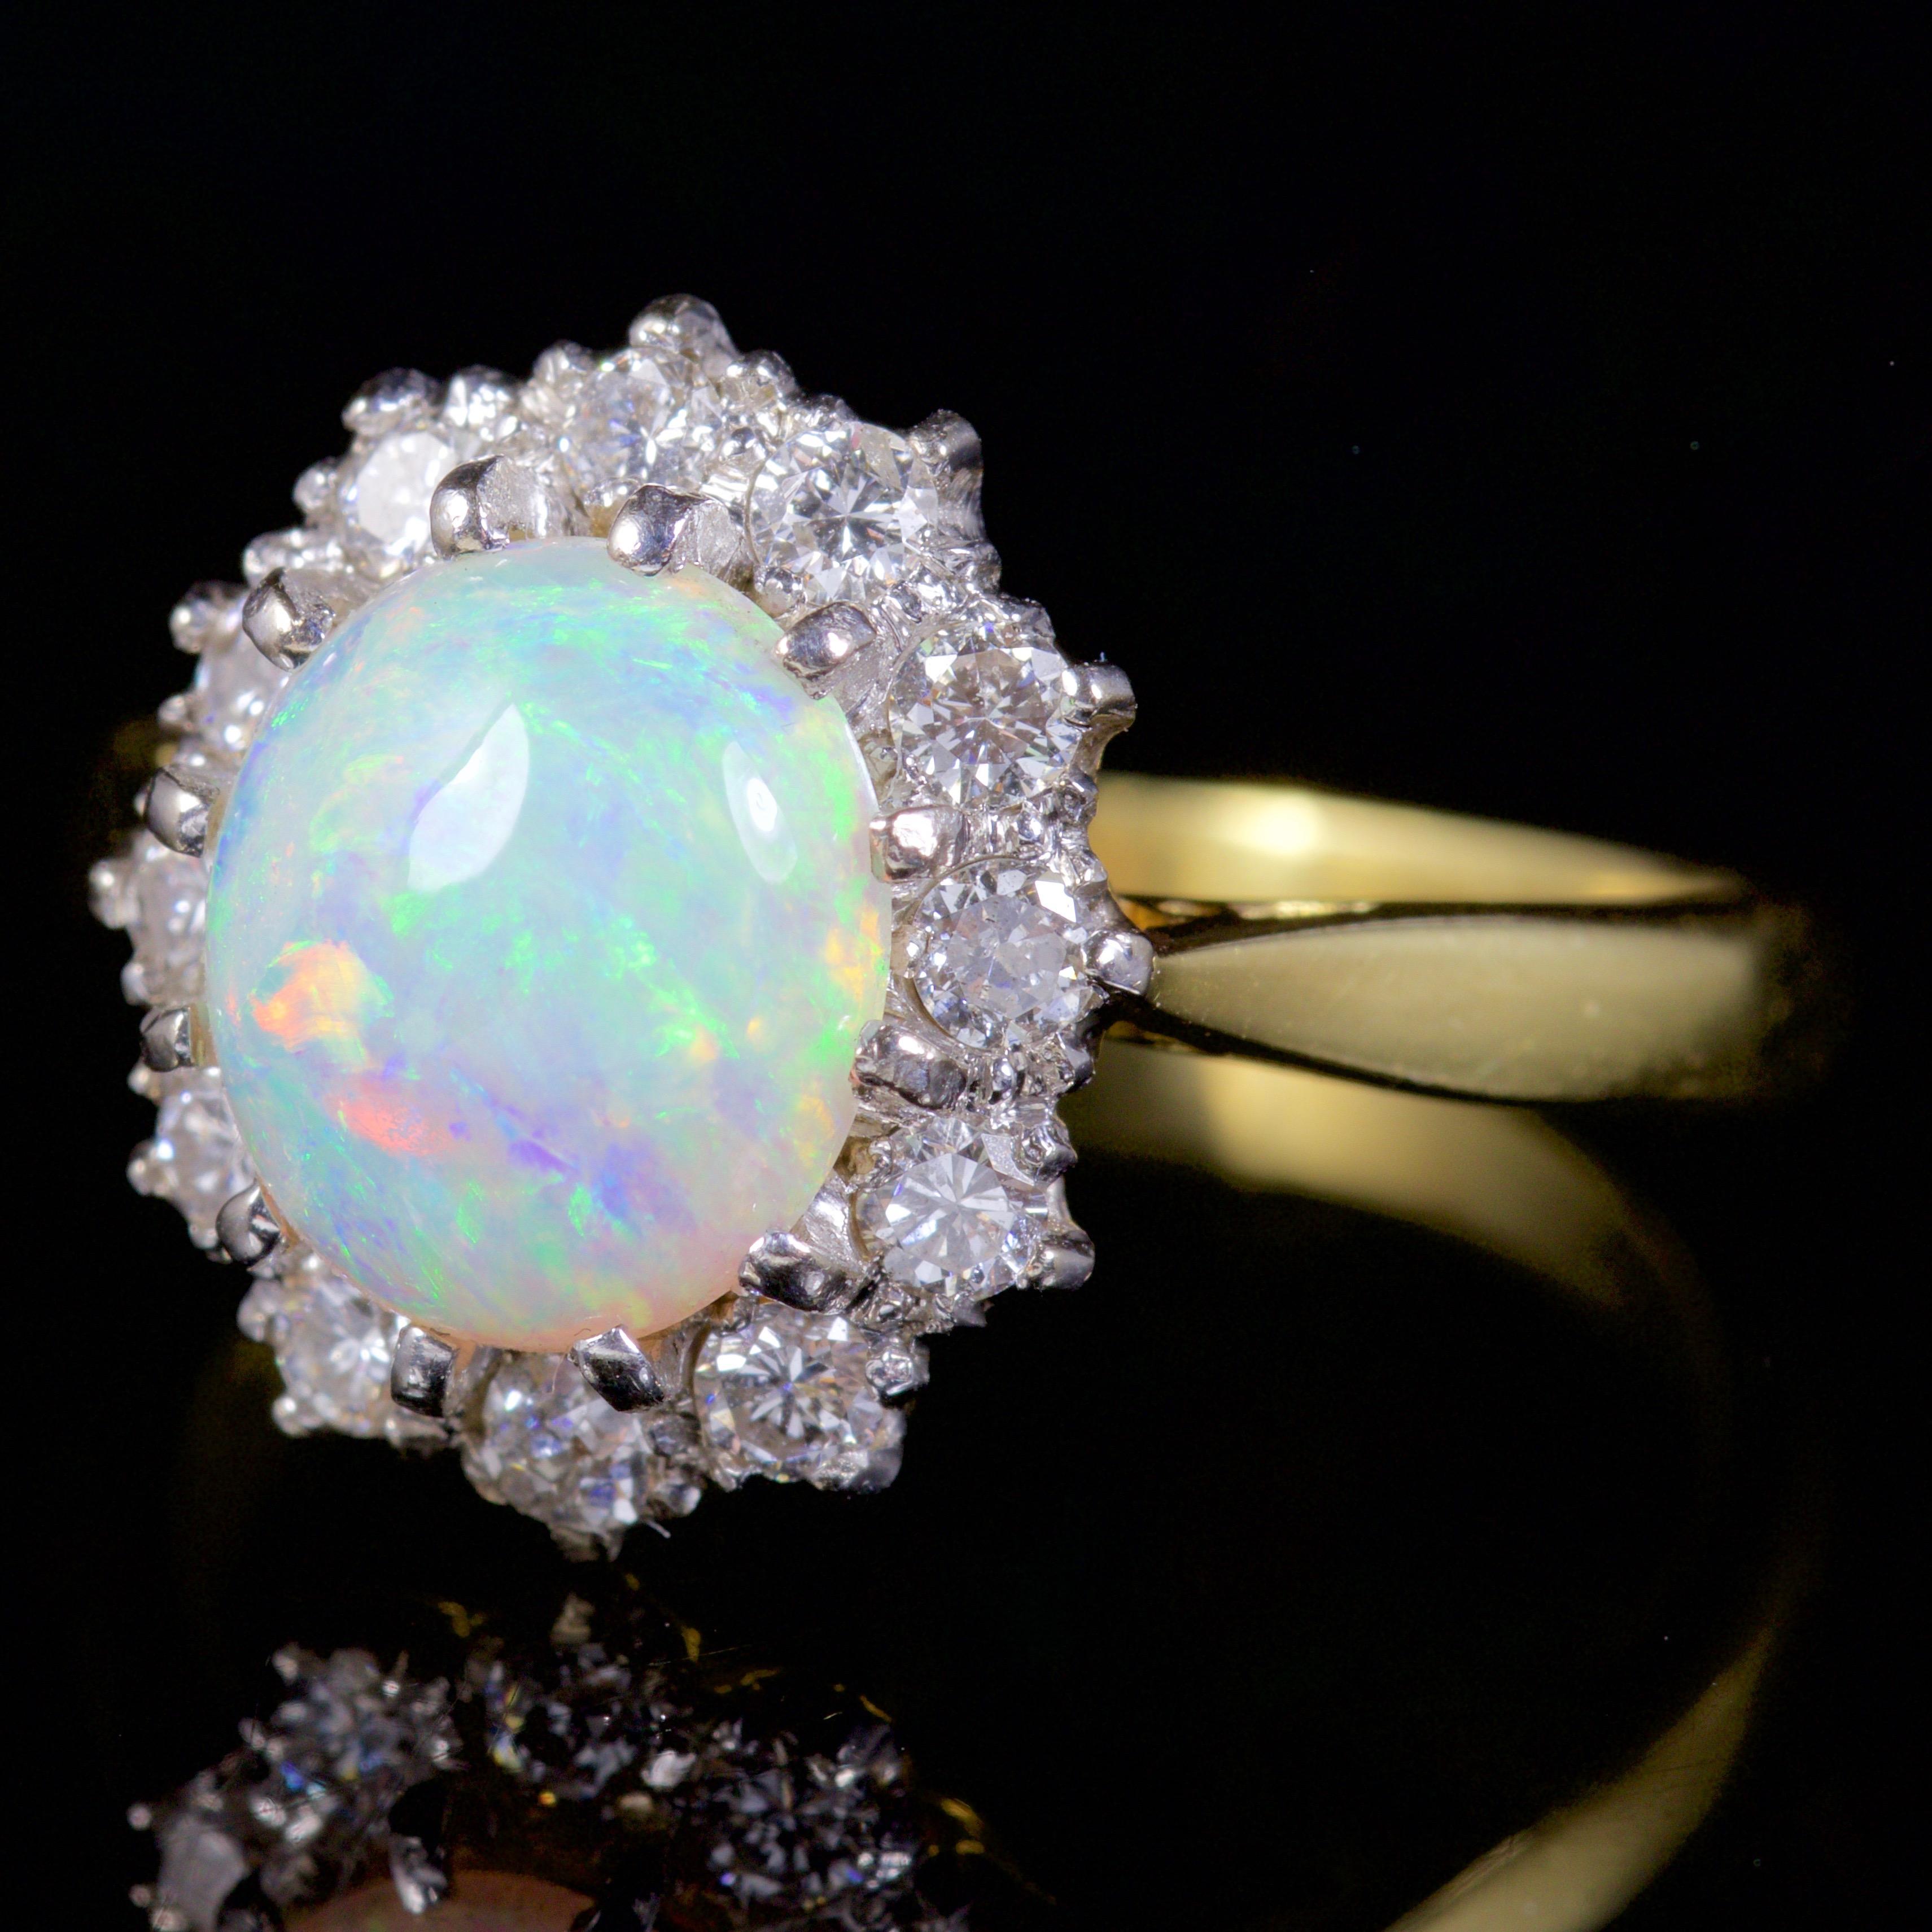 This very beautiful Victorian Opal and Diamond ring is Circa 1900.

The ring is decorated in the most wonderful 2ct natural Opal, with a halo of glistening Diamonds surrounding it.

Each Diamond is 0.07ct, and there are 12 Diamonds, which totals to